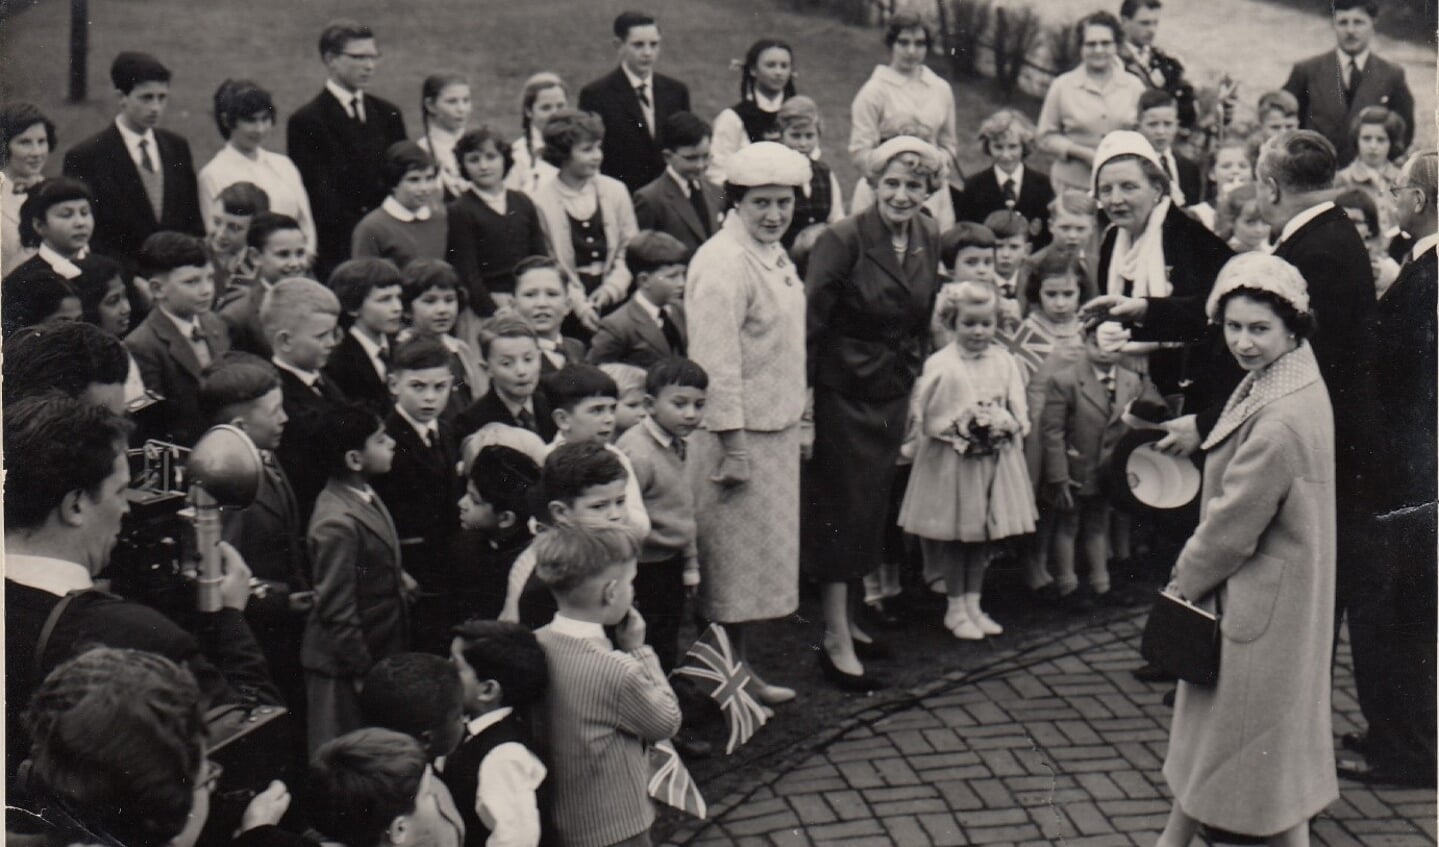 A royal visit: H.M. Queen Elizabeth and Queen Juliana strolling around the pupils and staff of the BSN. Photo: BSN